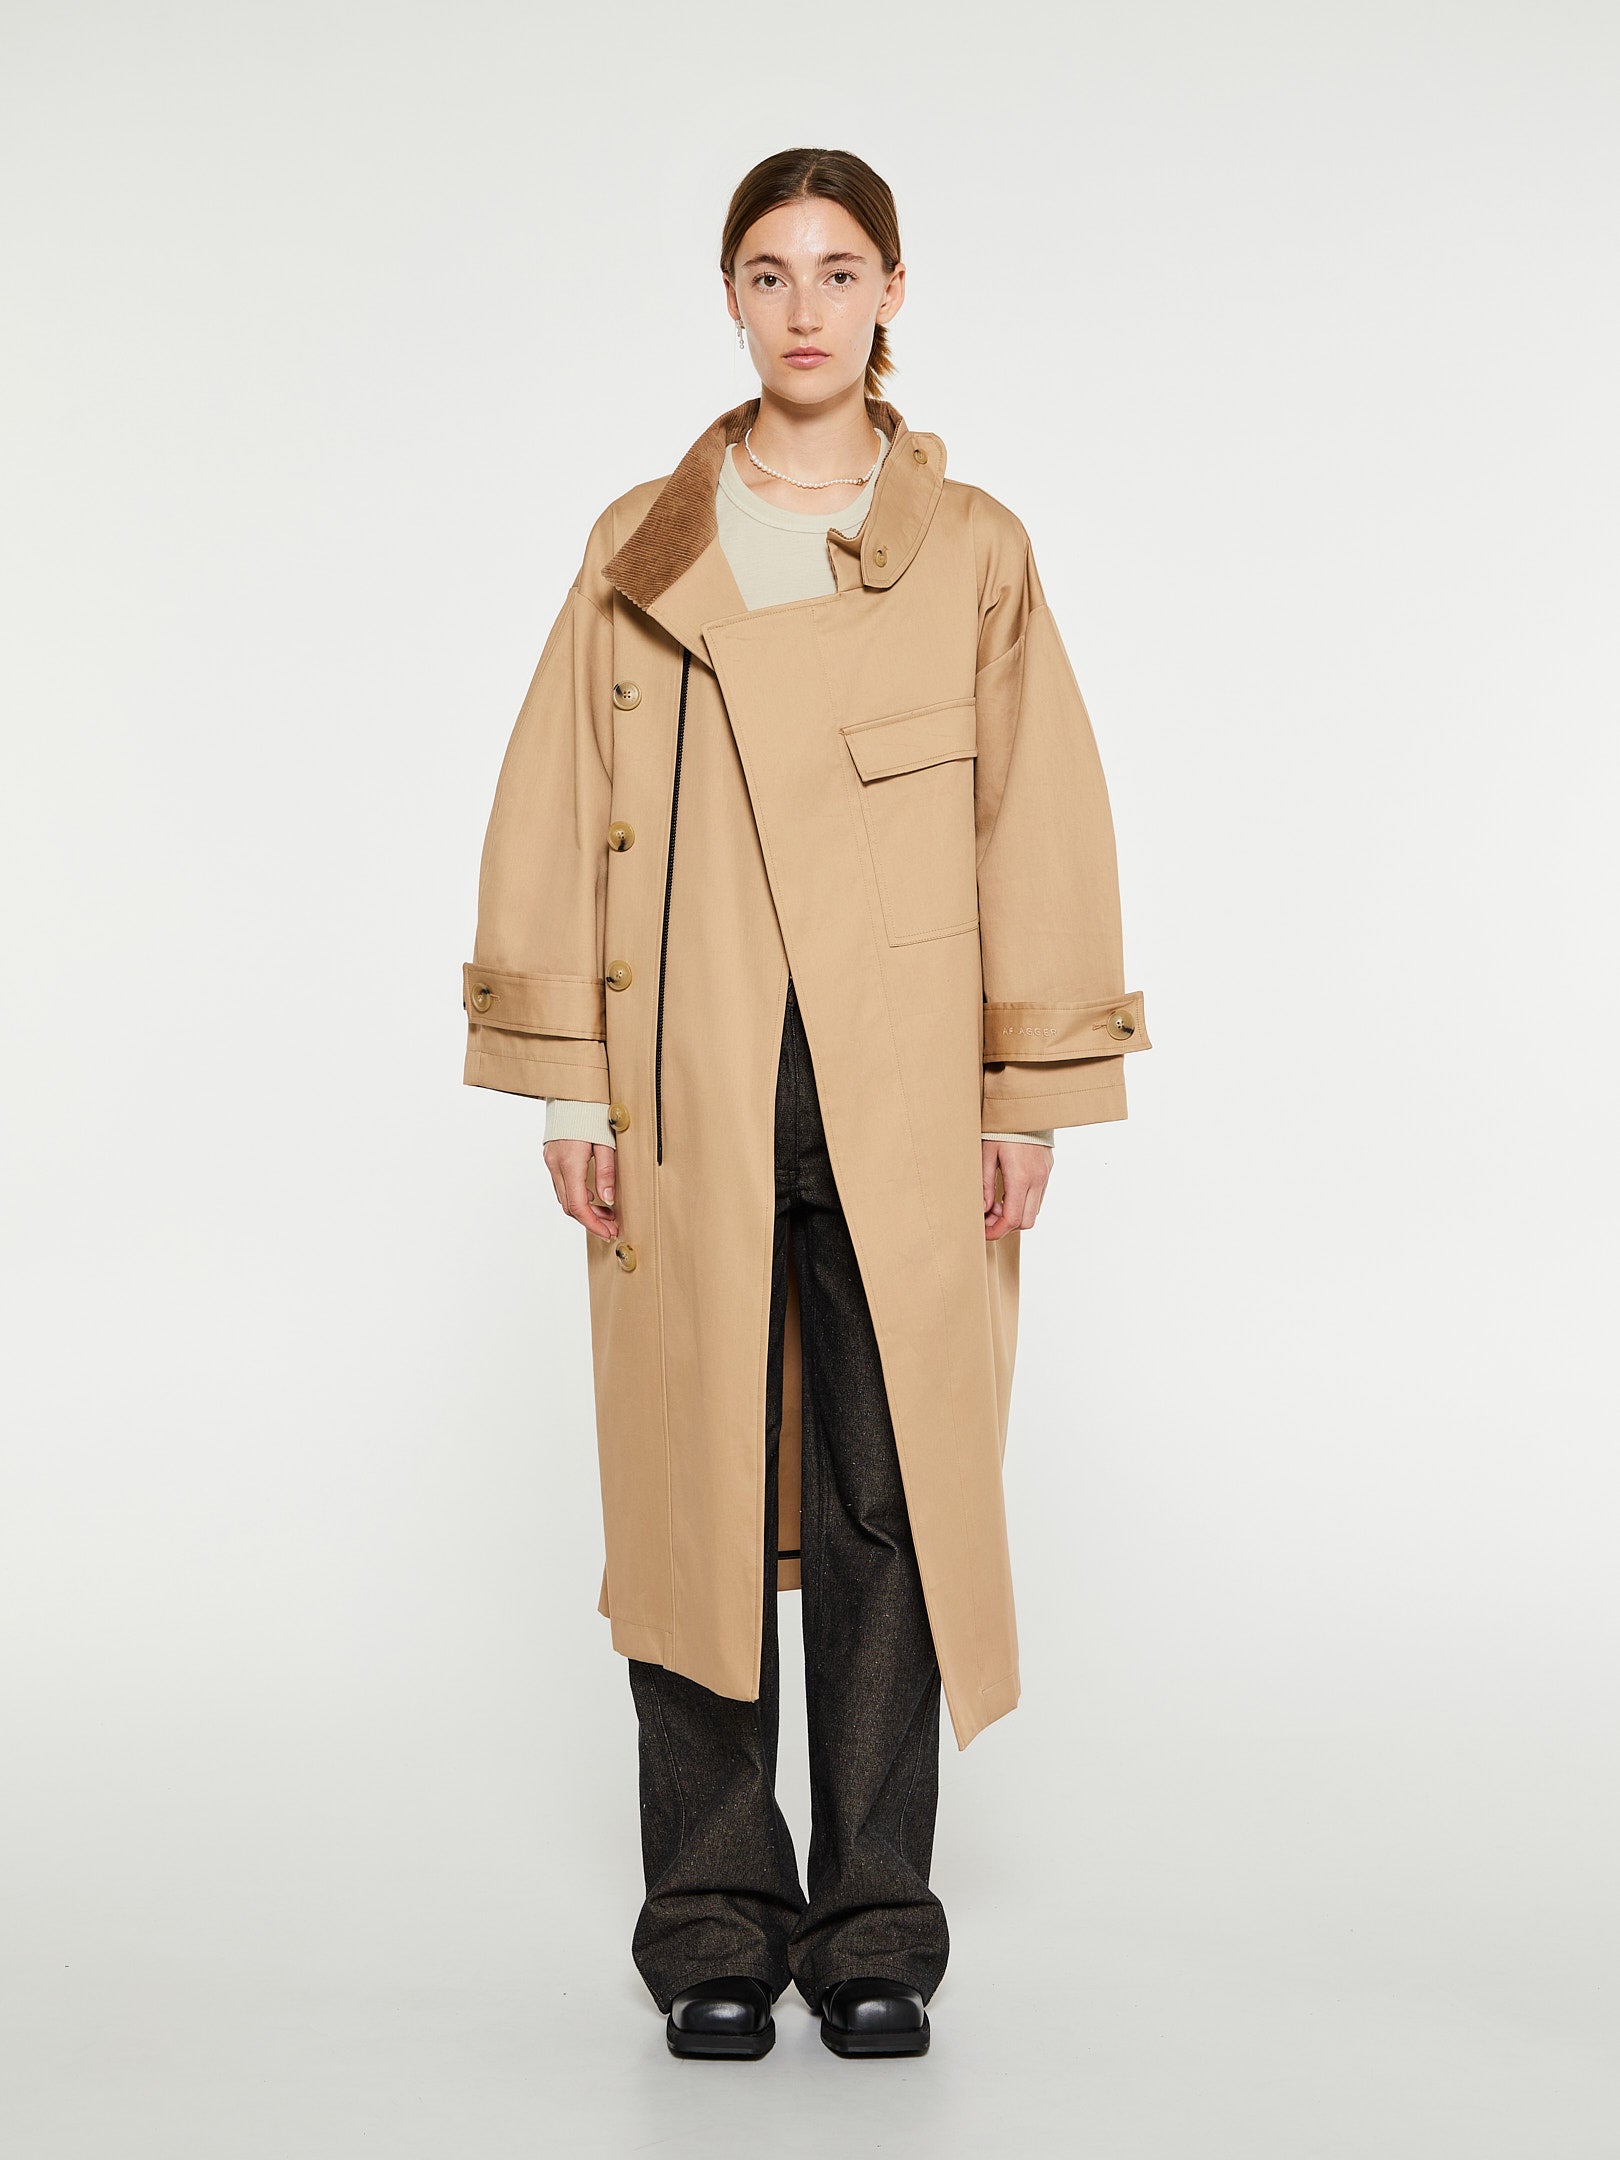 Coats & Jackets for women | Shop the selection at stoy